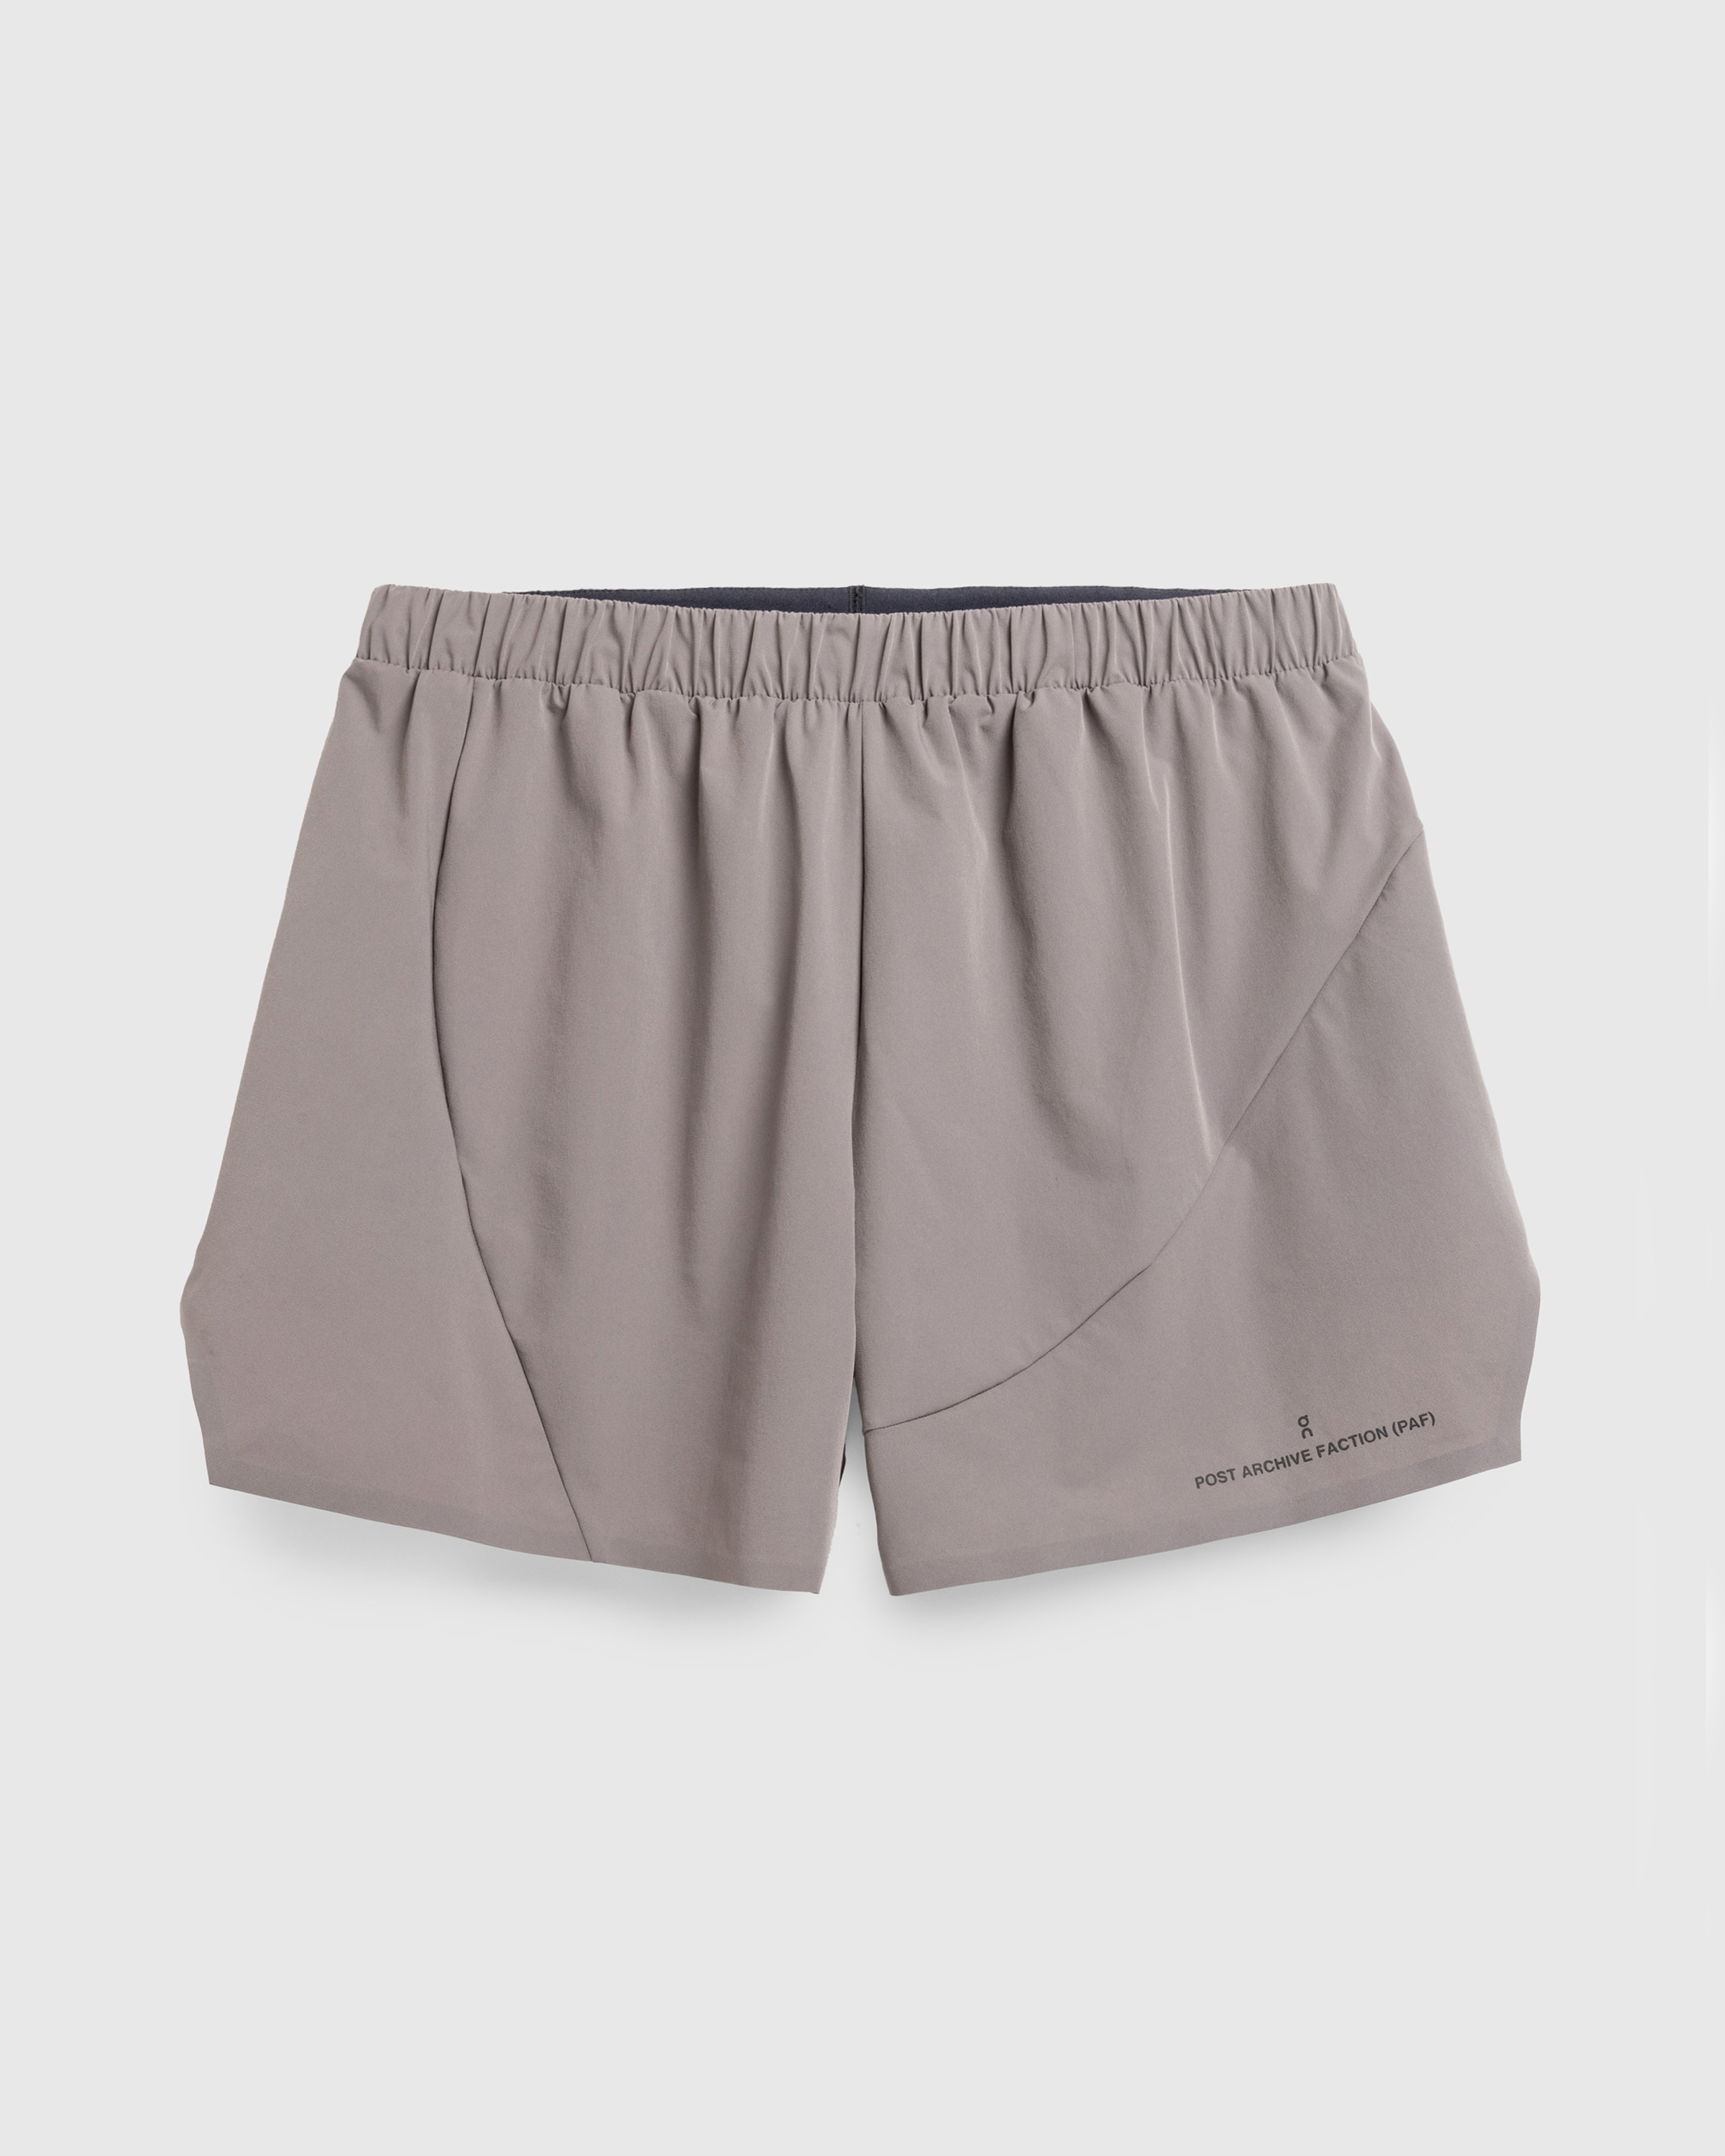 On x Post Archive Faction (PAF) – Shorts Eclipse/Shadow - Shorts - Brown - Image 1